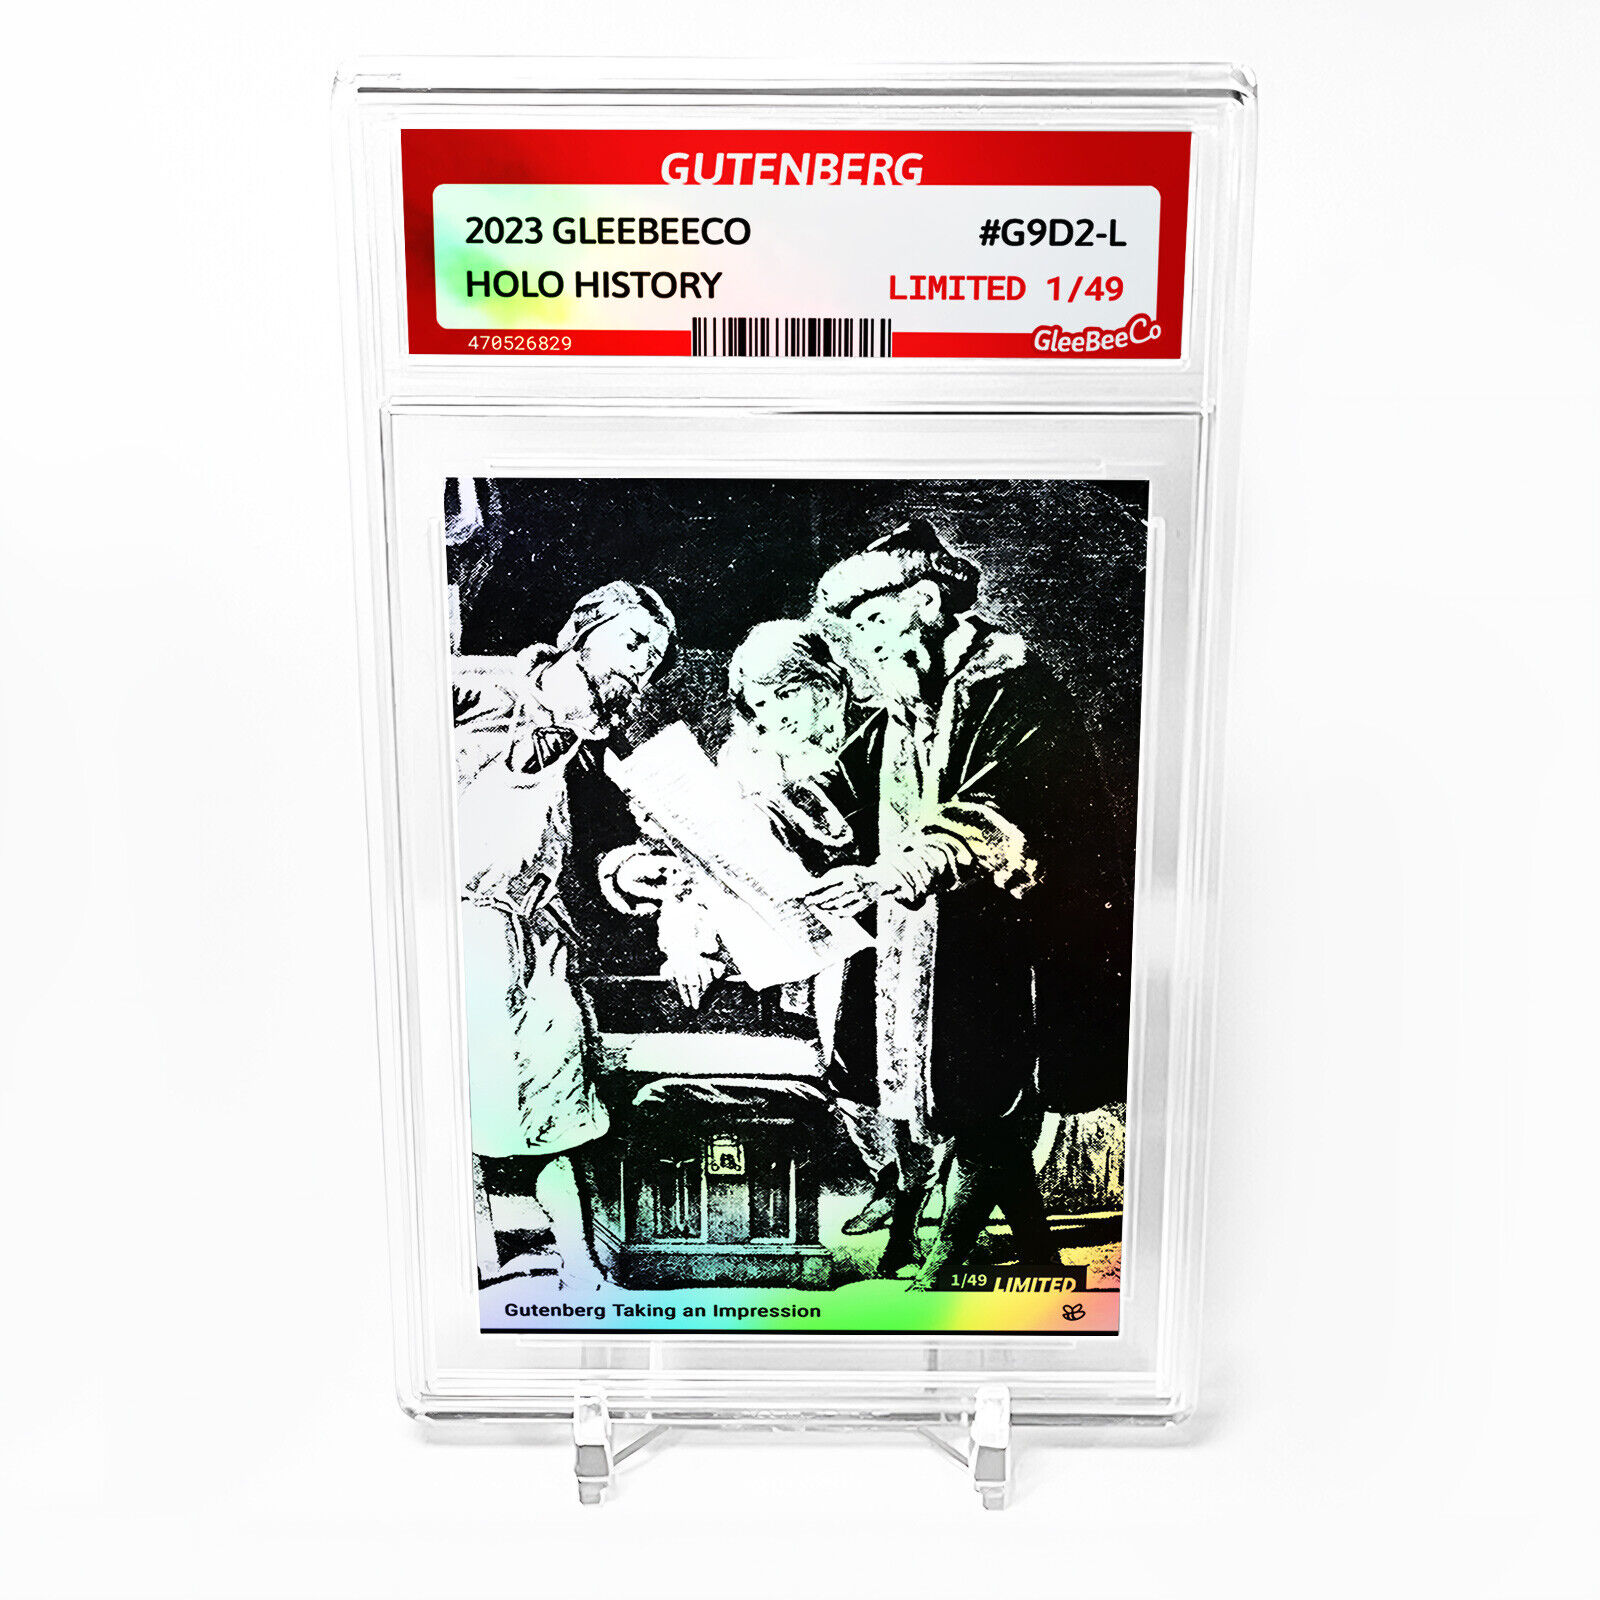 GUTENBERG TAKING AN IMPRESSION Card 2023 GleeBeeCo Holographic #G9D2-L /49